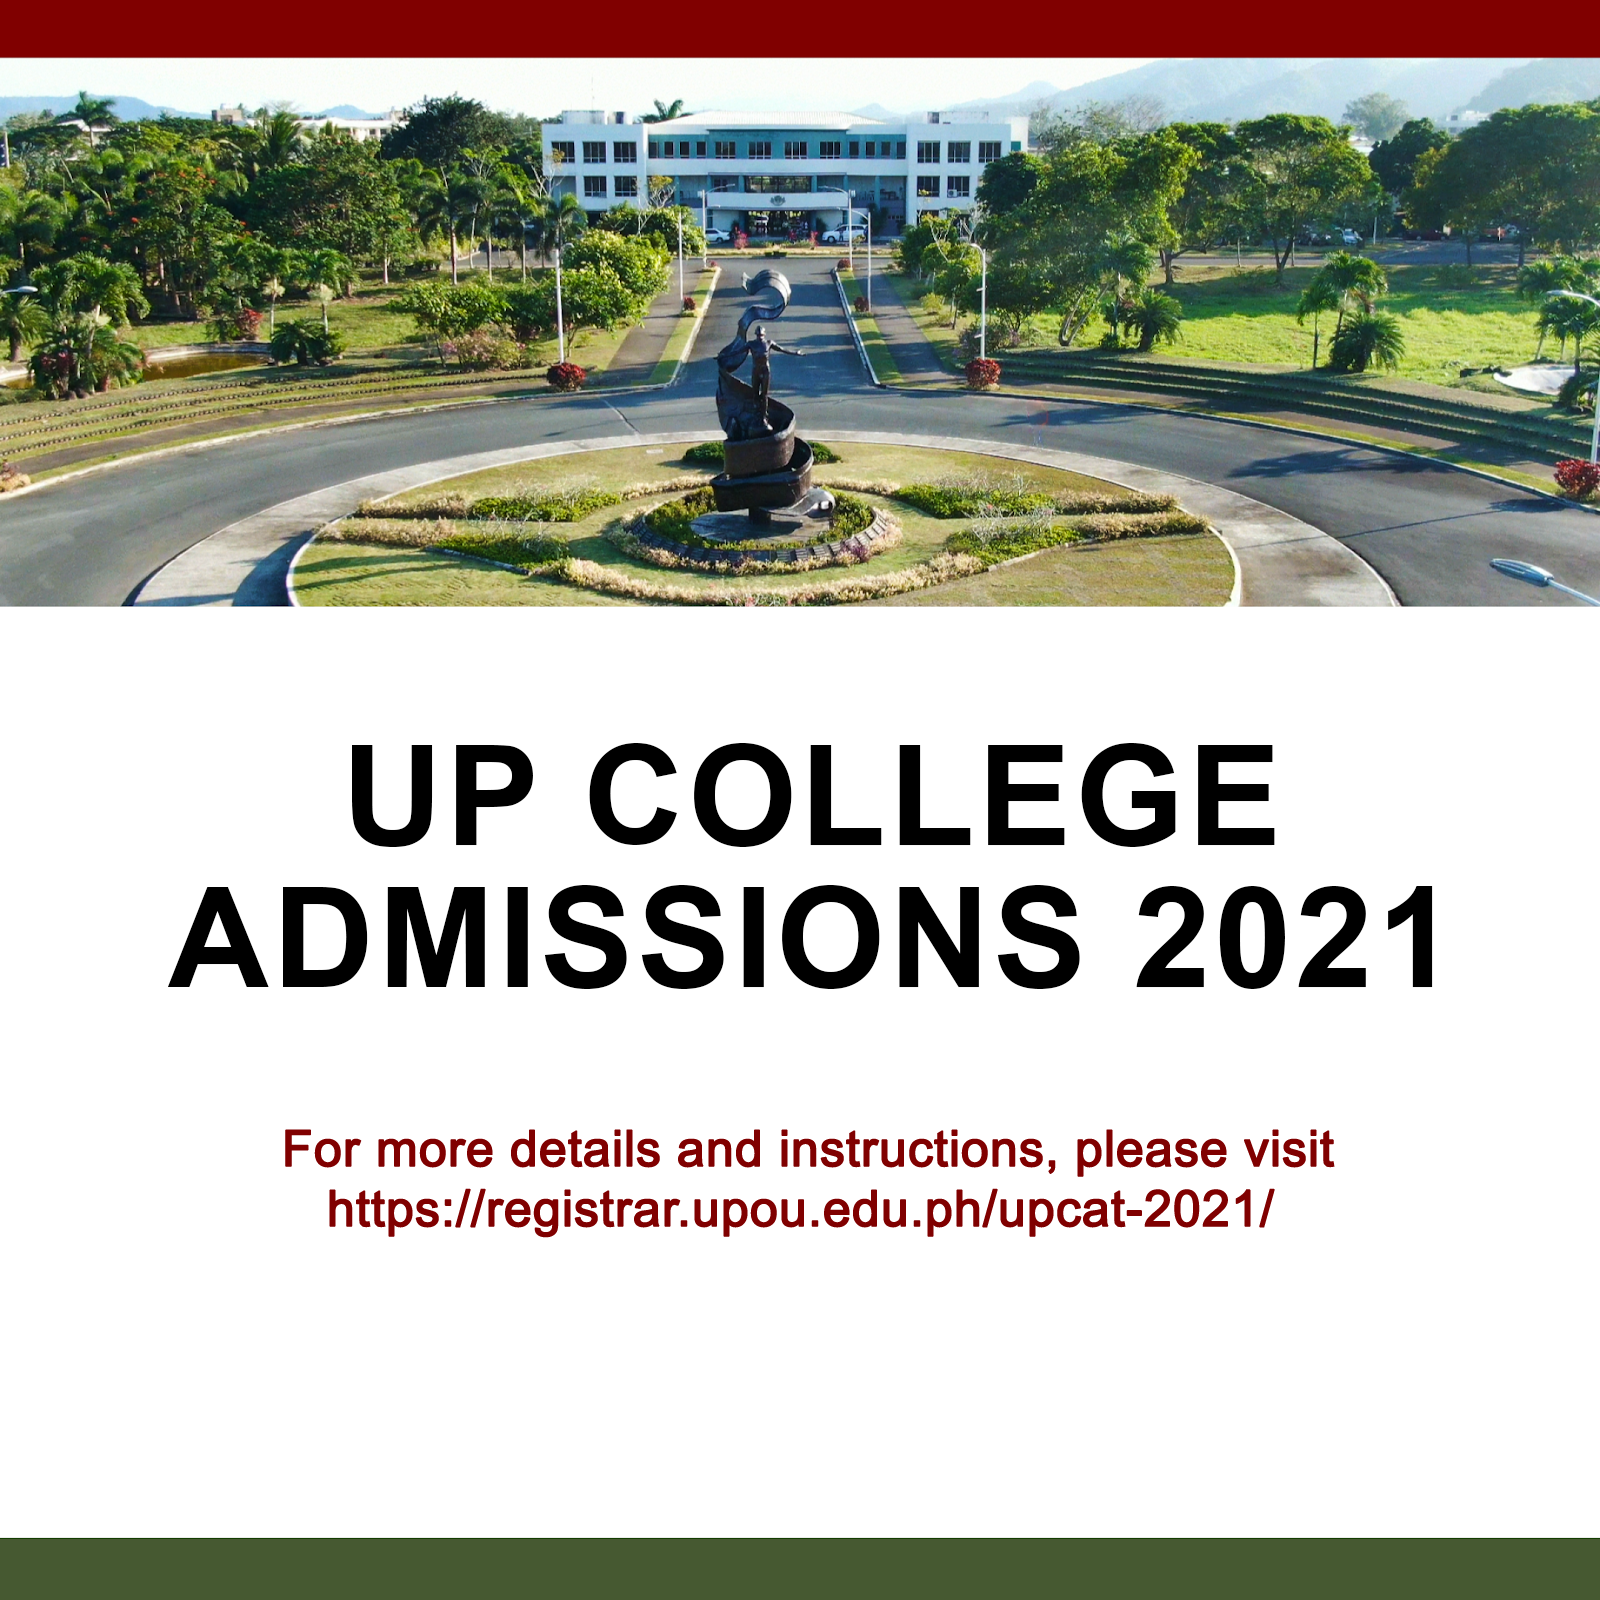 UP College Admissions 2021